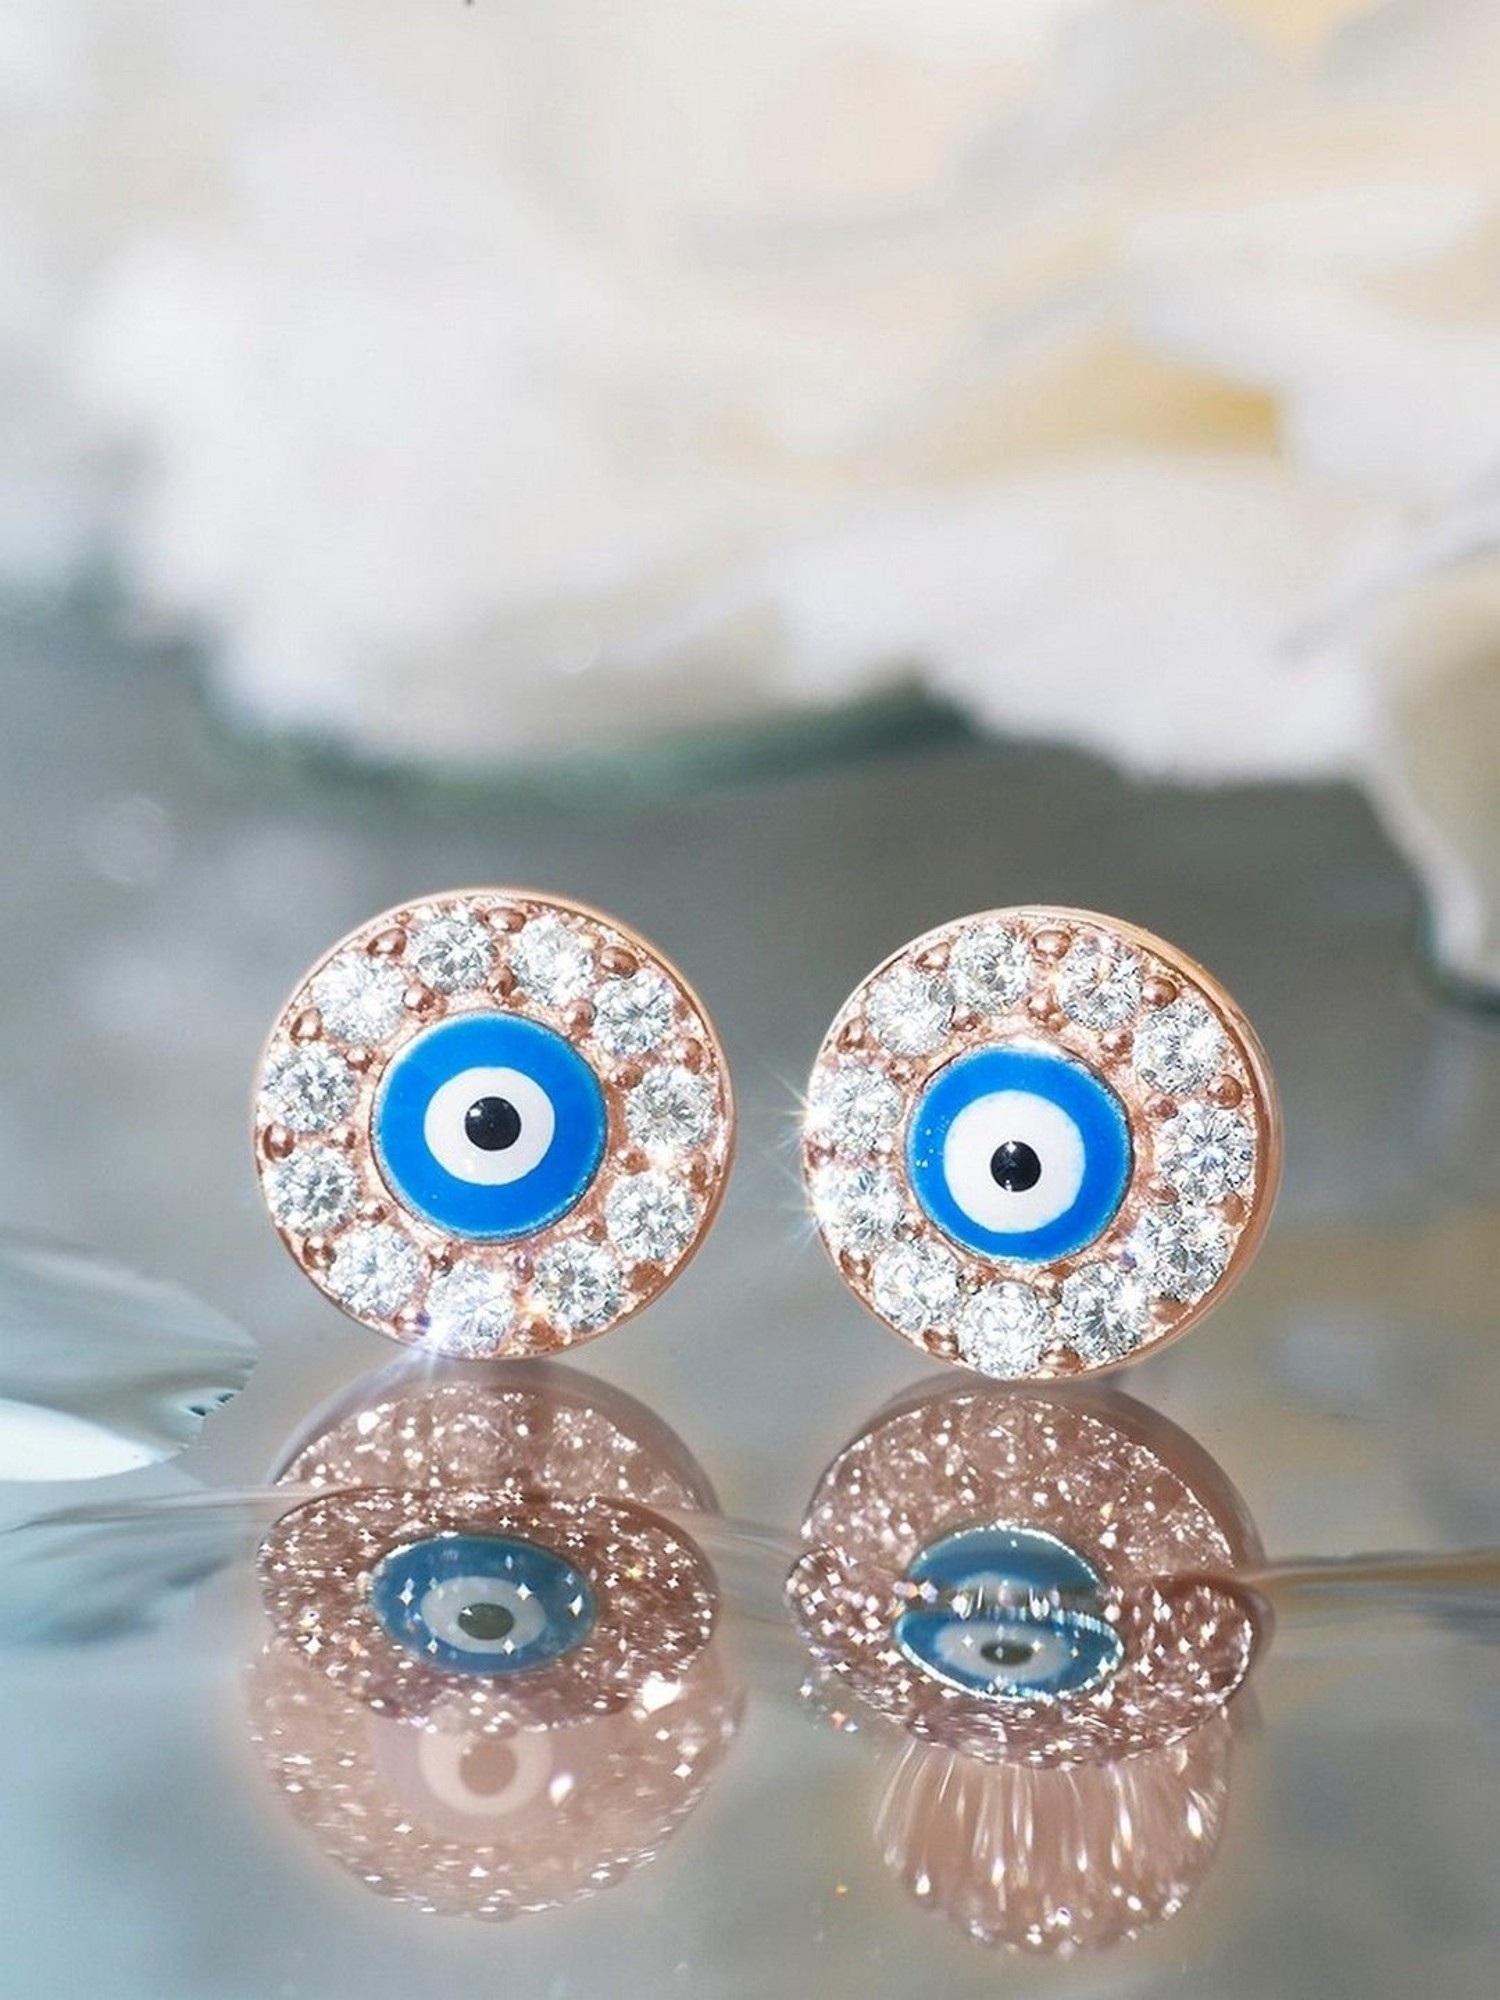 KIKICHIC NYC | Ball Screw Flat Back Tiny CZ Evil Eye Stud Earrings  Cartilage, Tragus, Helix, Conch in Sterling Silver in 14k Gold and Silver.